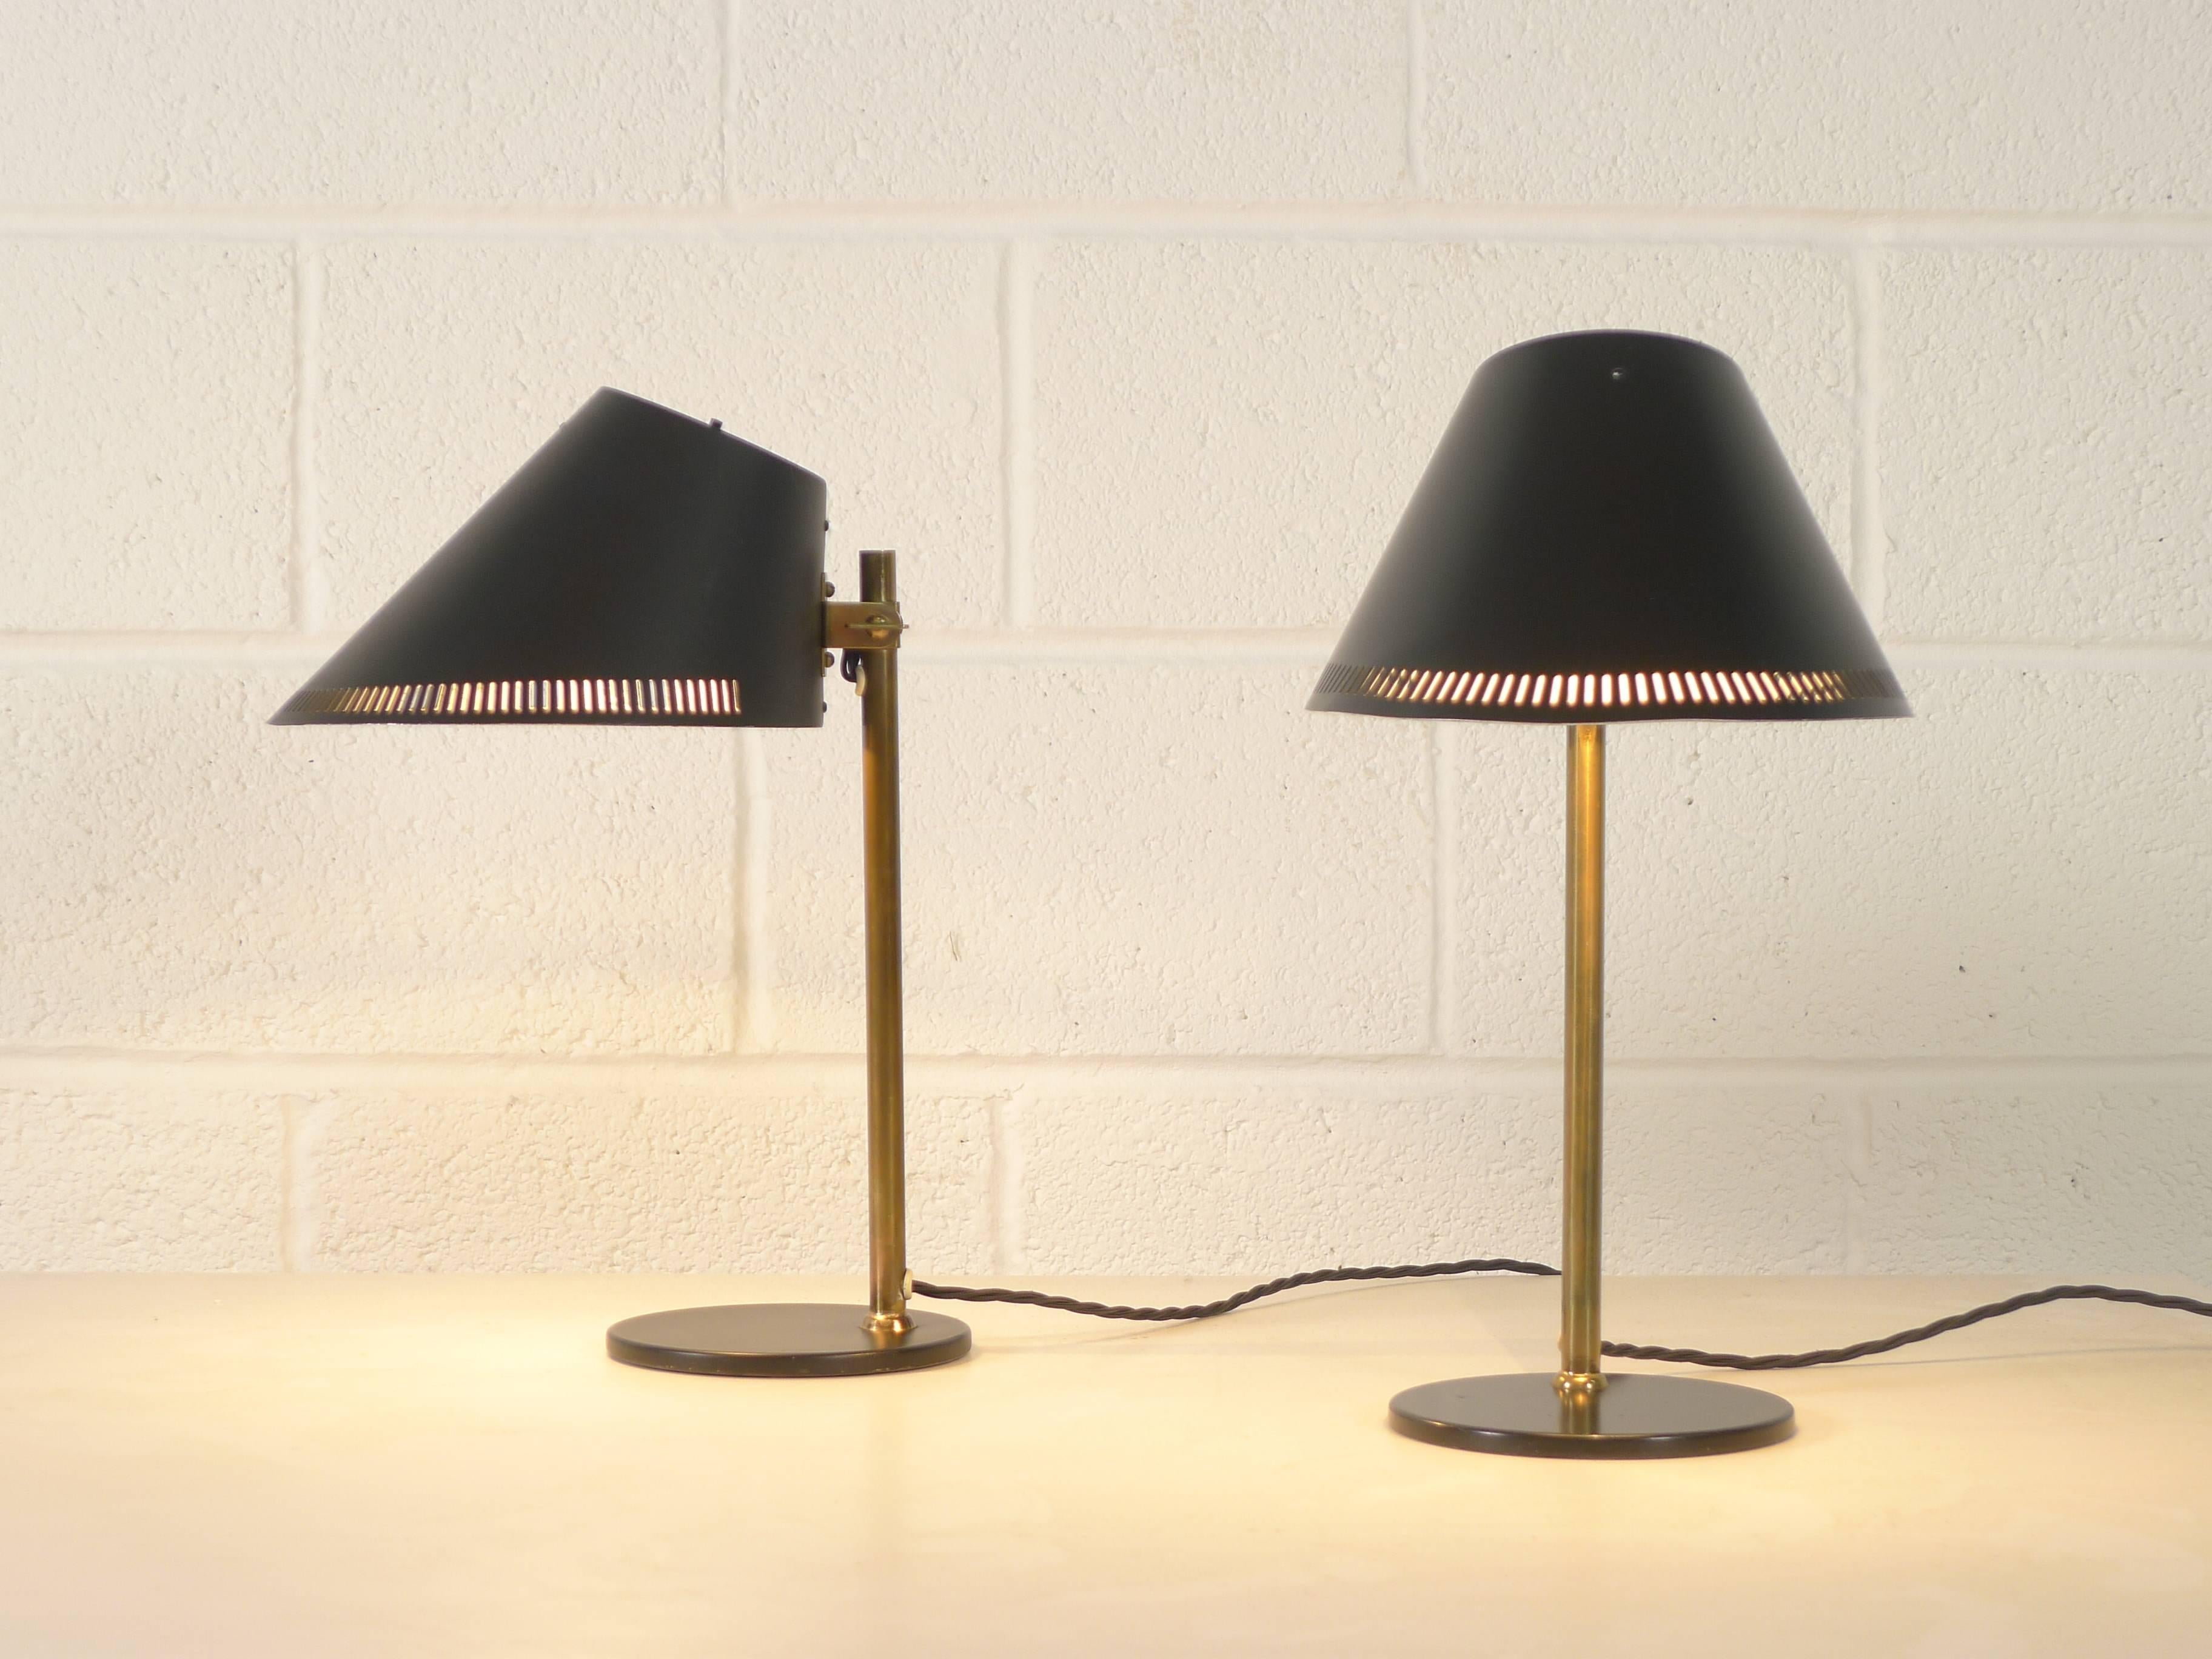 Paavo Tynell, Pair of Desk Lamps with Black Enamel Shades, Idman Production 4